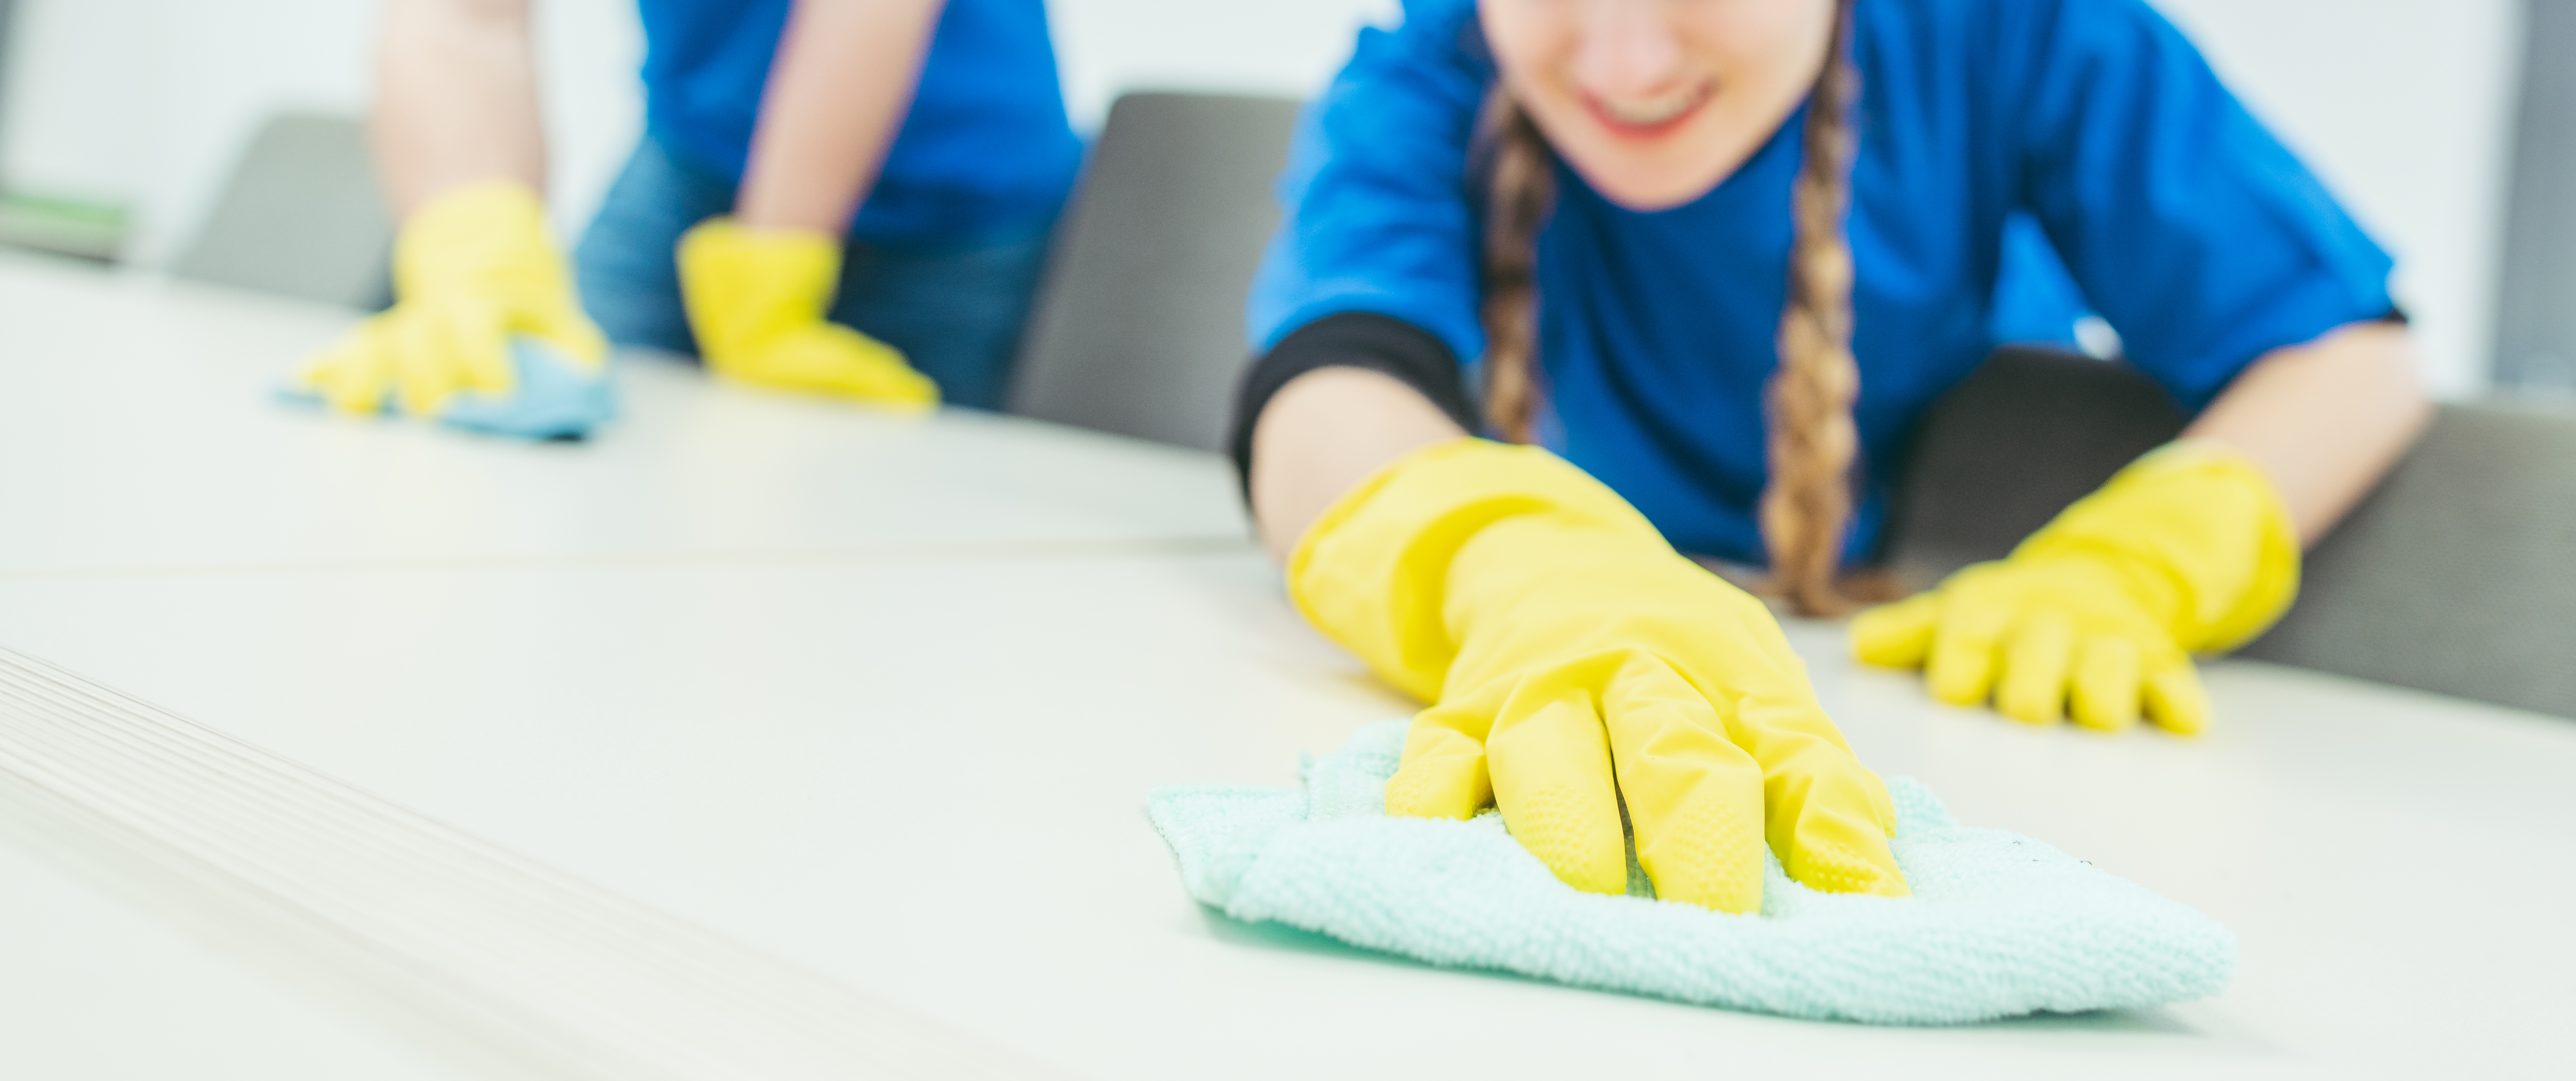 cleaning team members wearing yellow rubber gloves scrubbing a surface